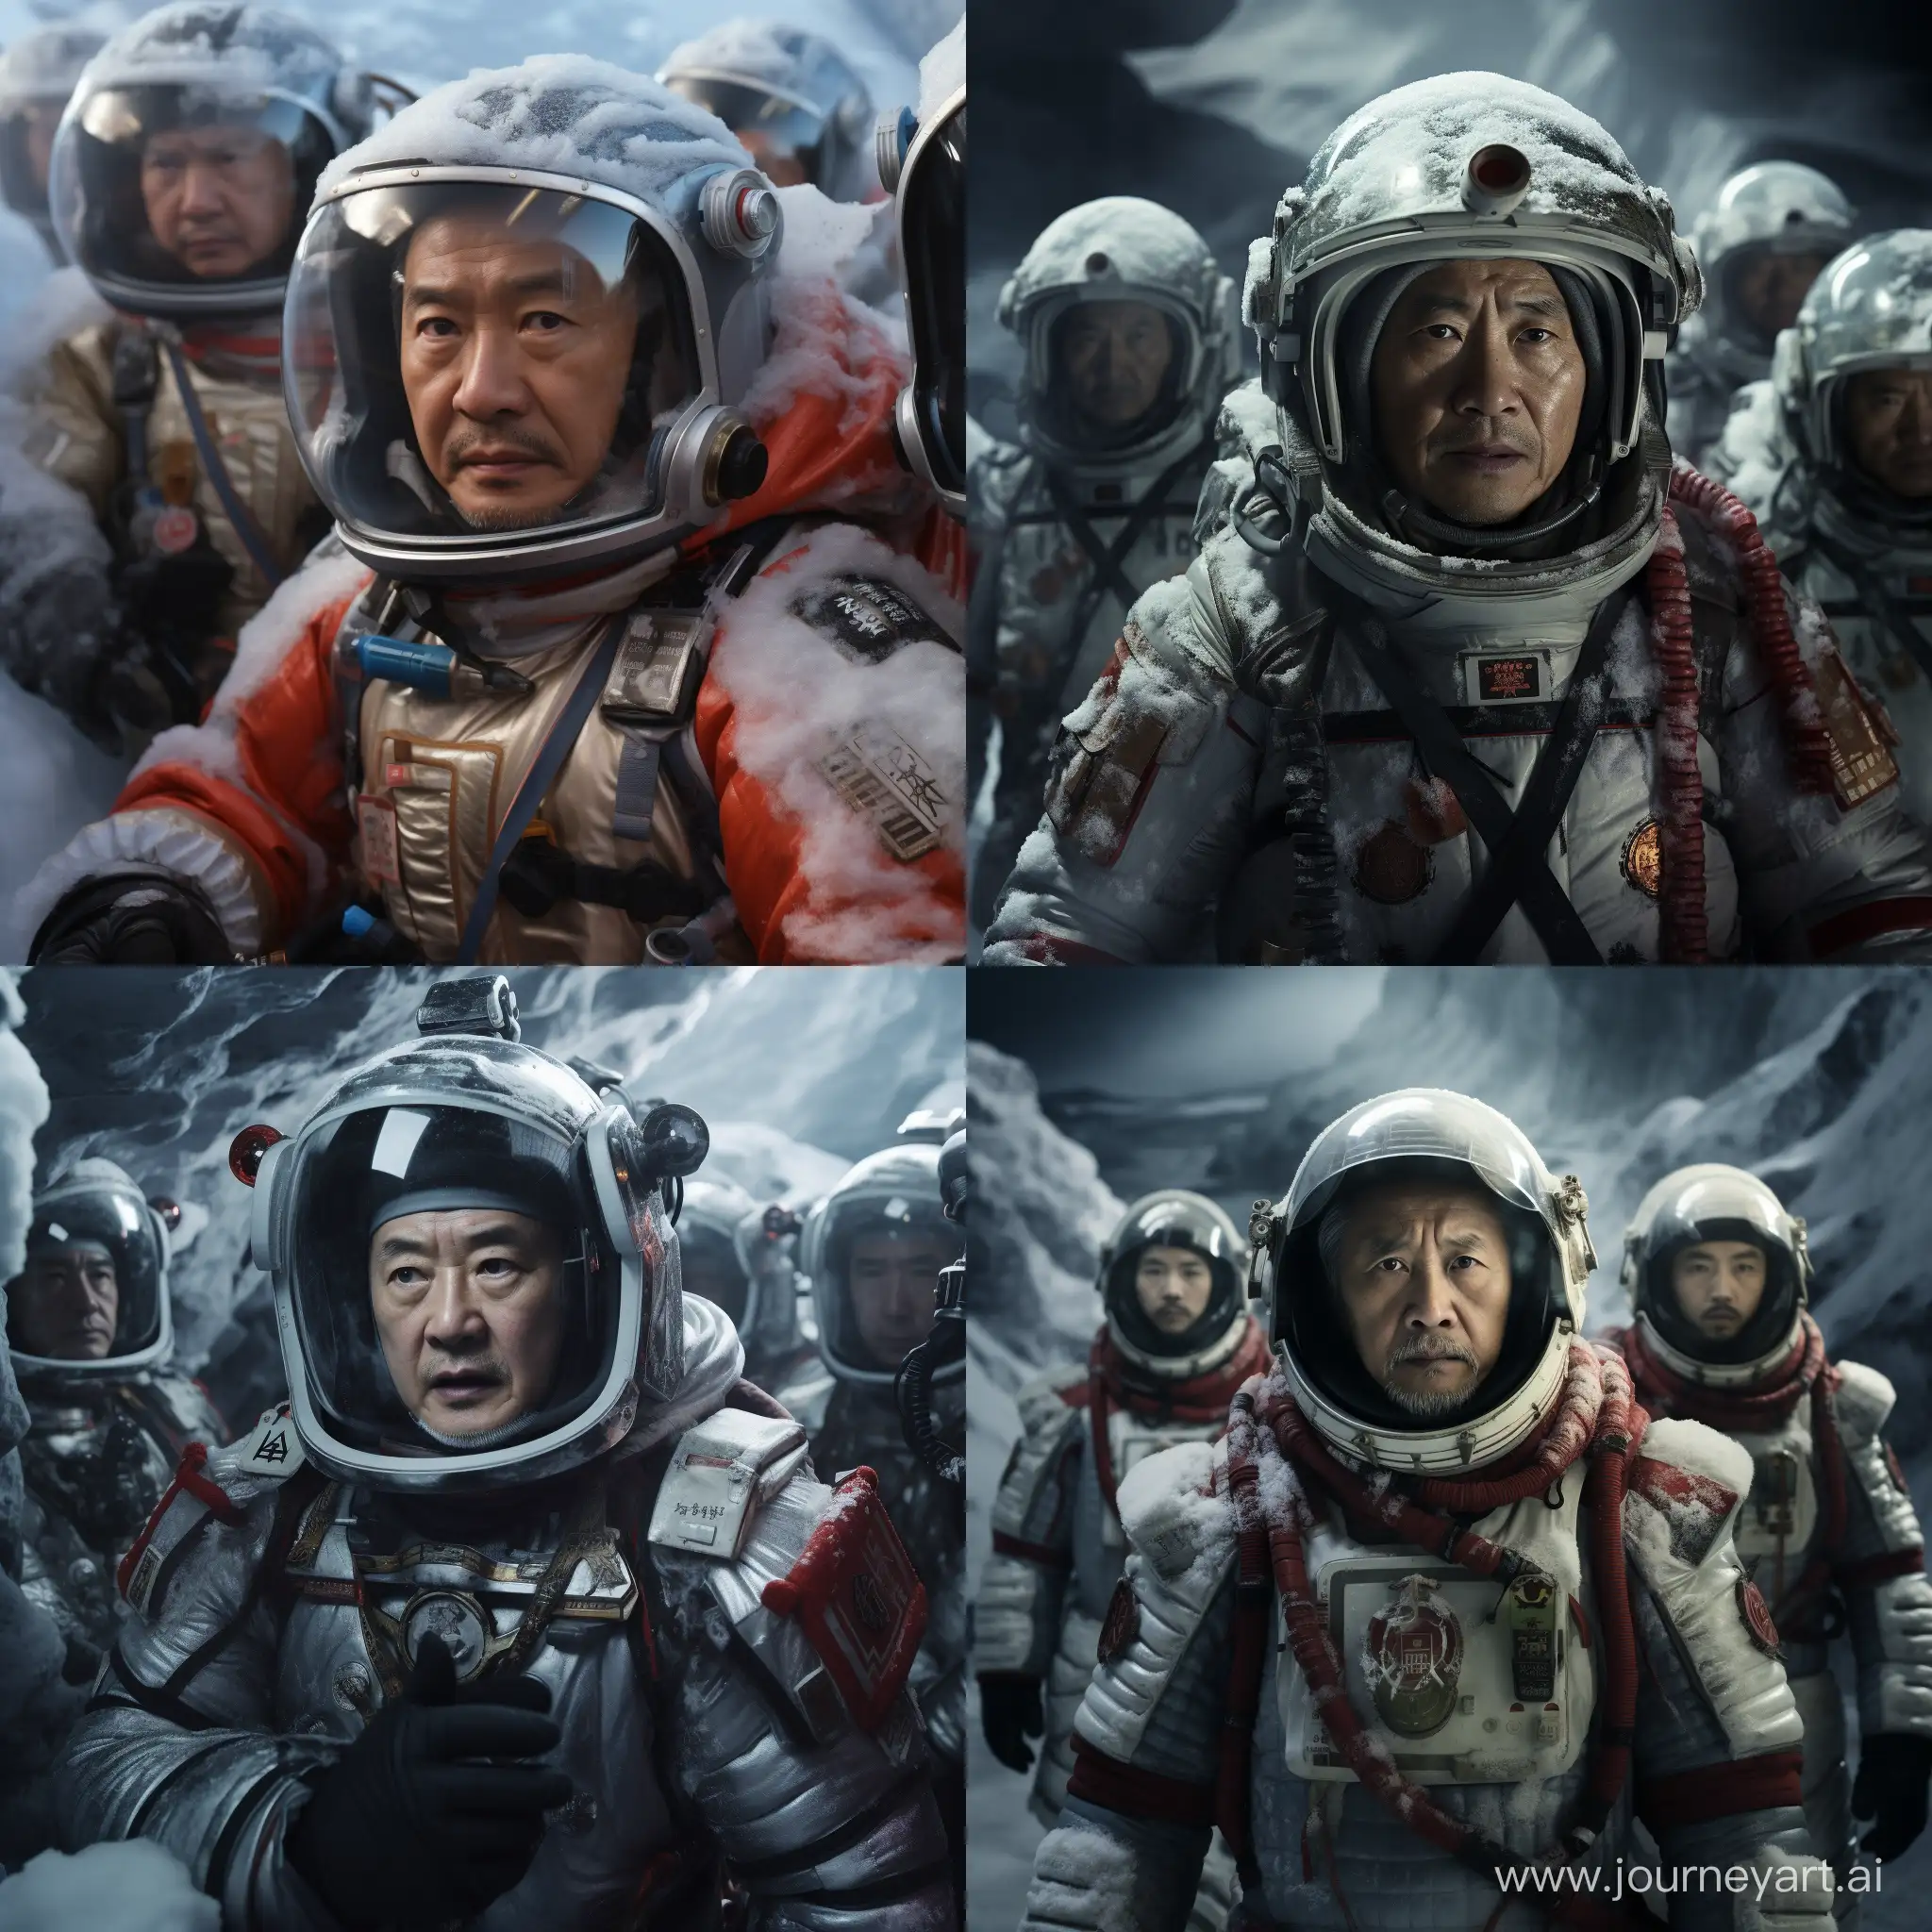 A bold and confident scene of Chinese filmmakers presenting "The Wandering Earth 2" at the Oscars, symbolizing a challenge to Western ideologies, set in an artistic and assertive environment.